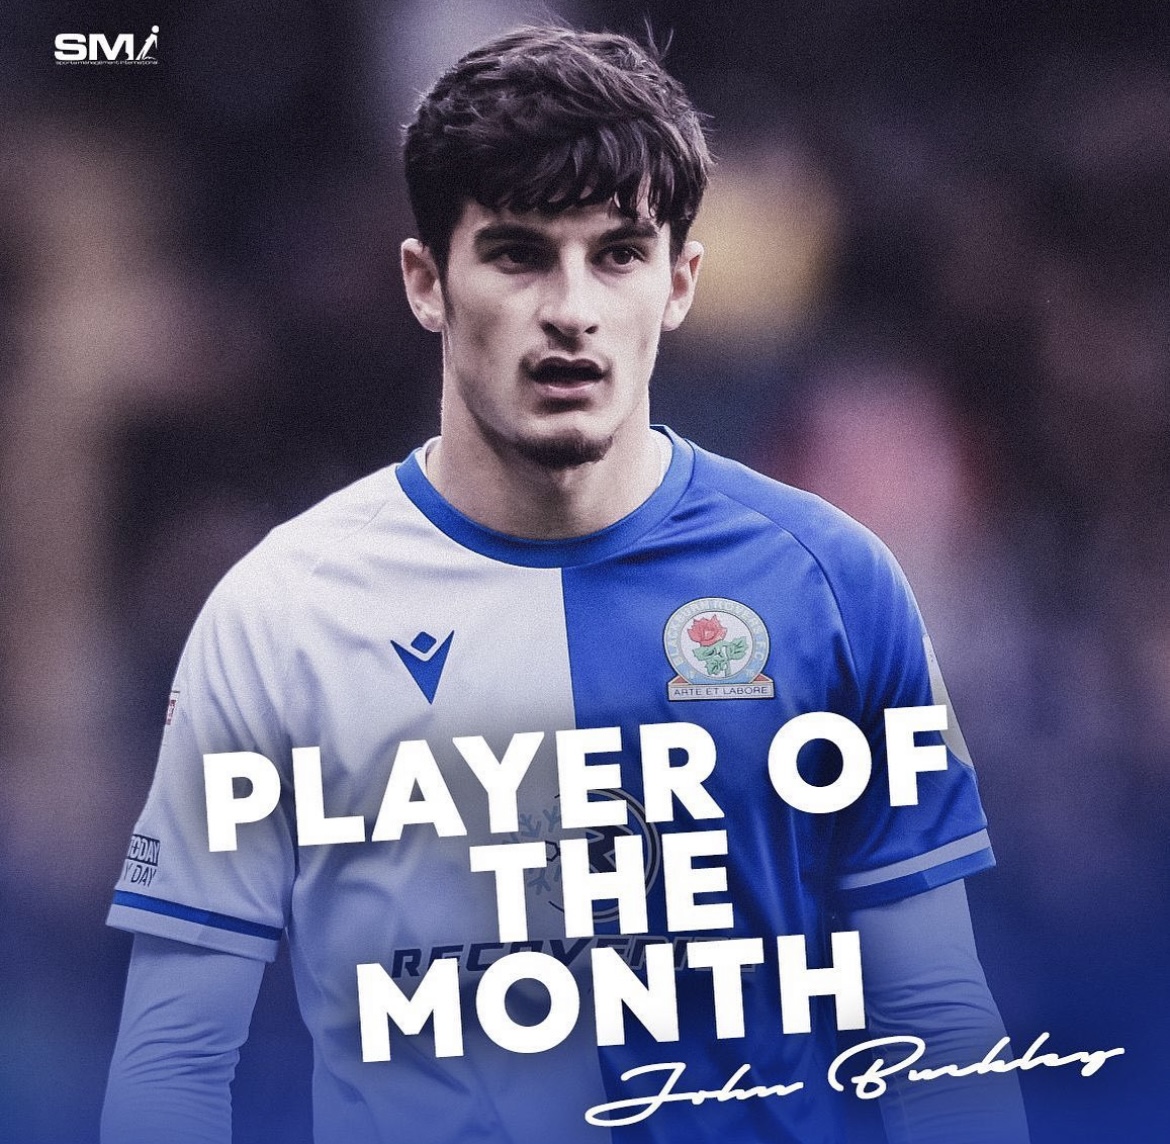 John Buckley player of the month